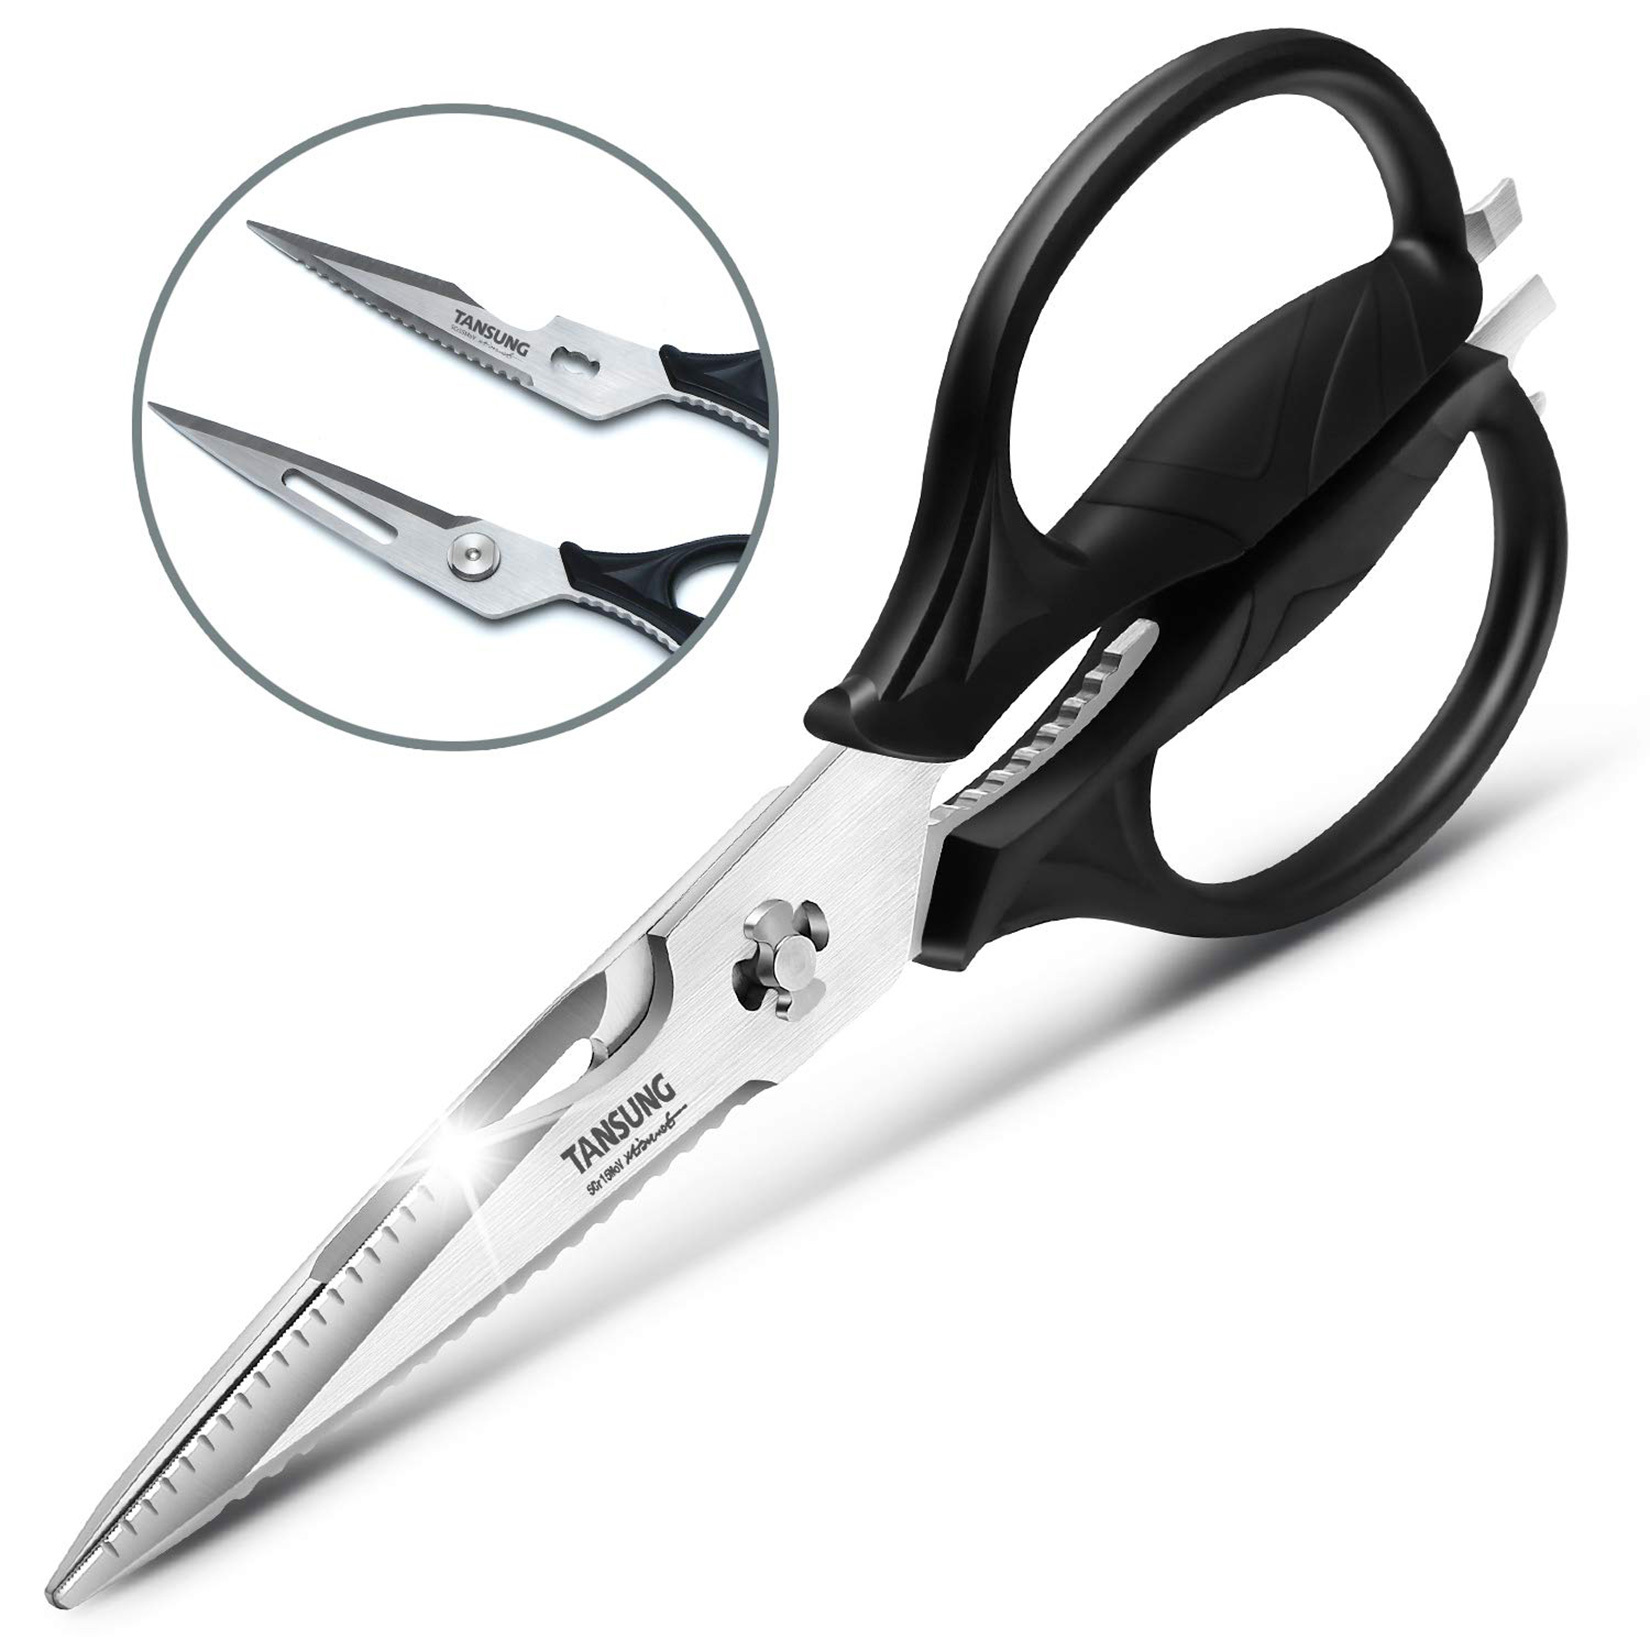 Tansung Heavy Duty Poultry Shears - Anti-rust Kitchen Scissors With Soft  Grip Handles For Easy Cutting And Cleaning - Temu